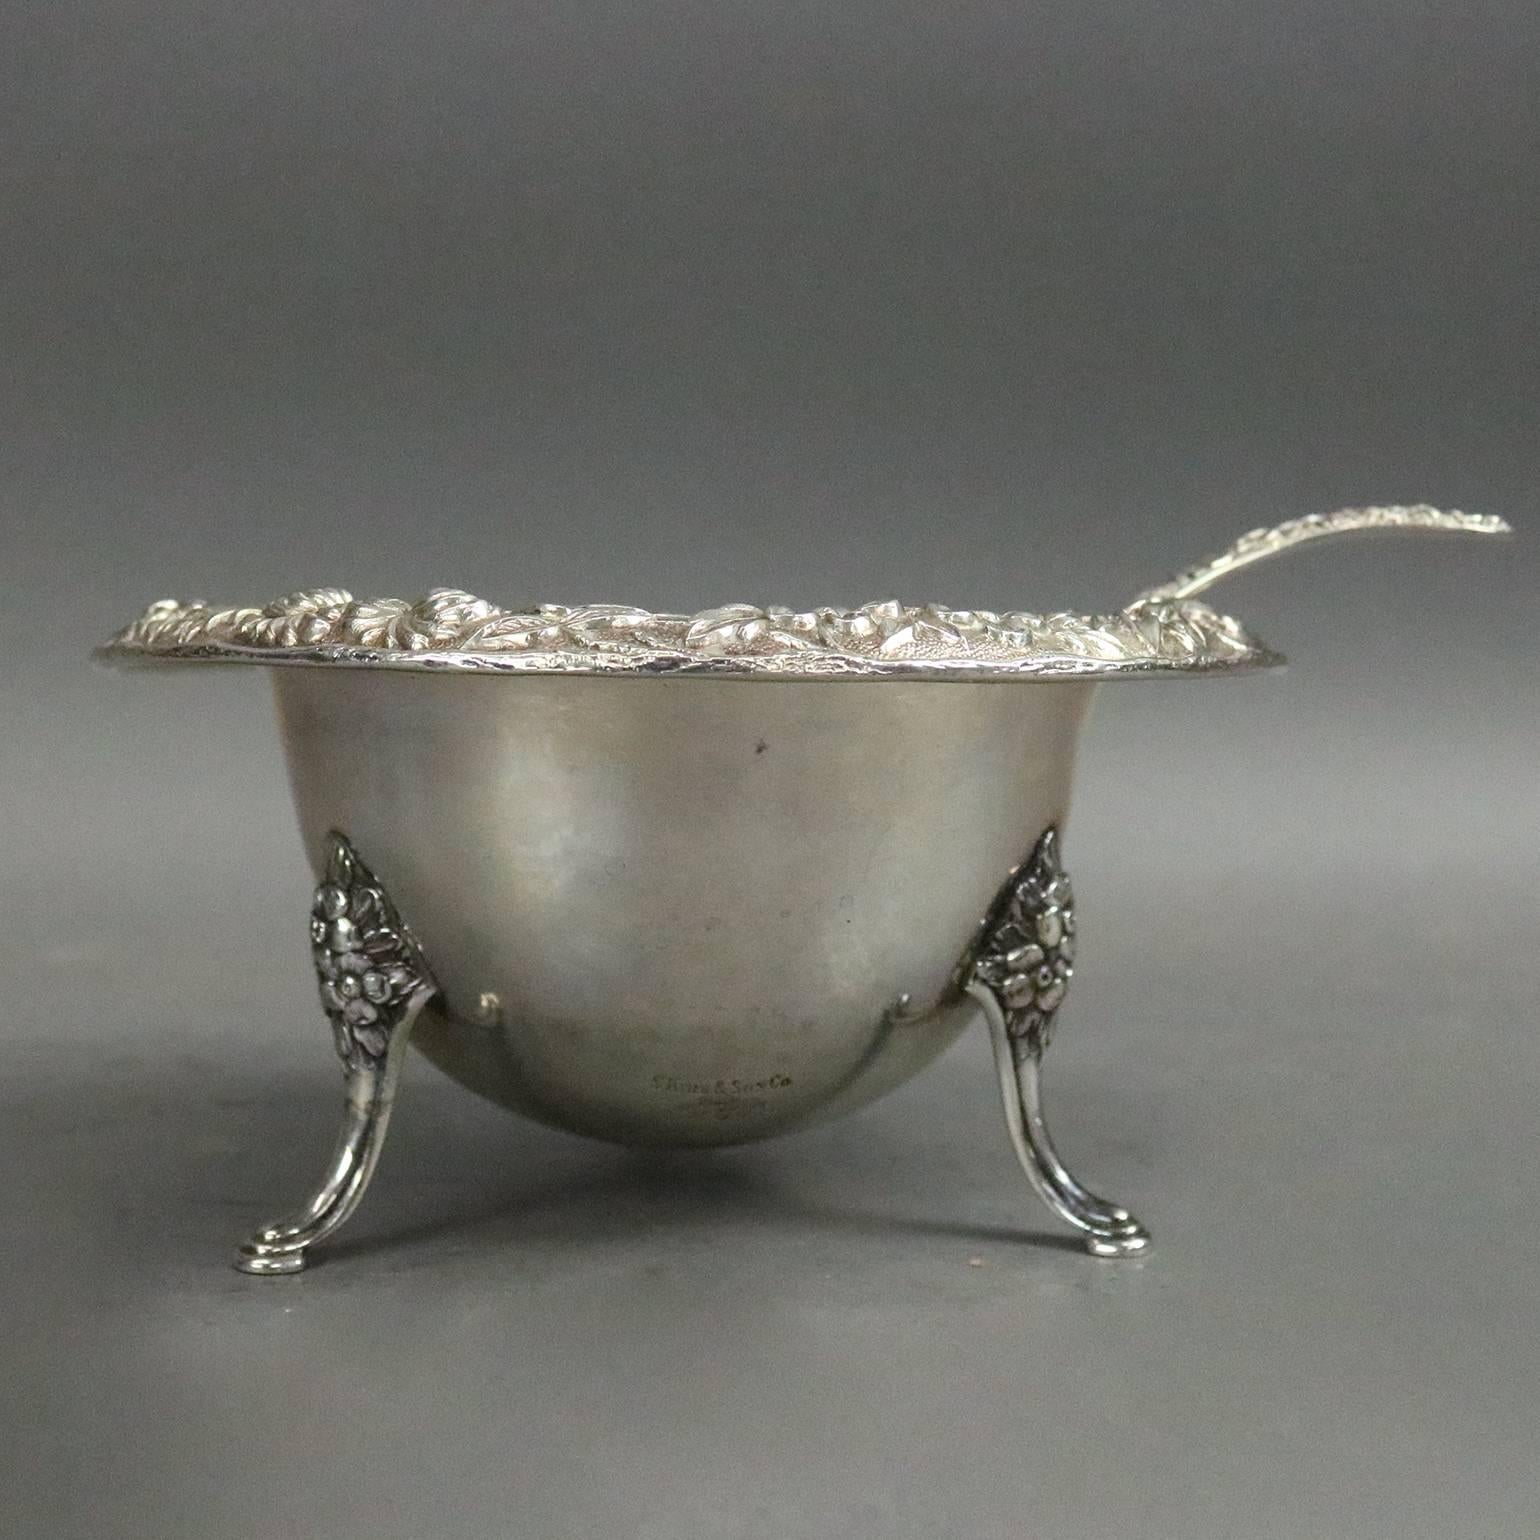 American Antique S. Kirk & Sons Sterling Silver Repousse Footed Sauce Bowl and Ladle